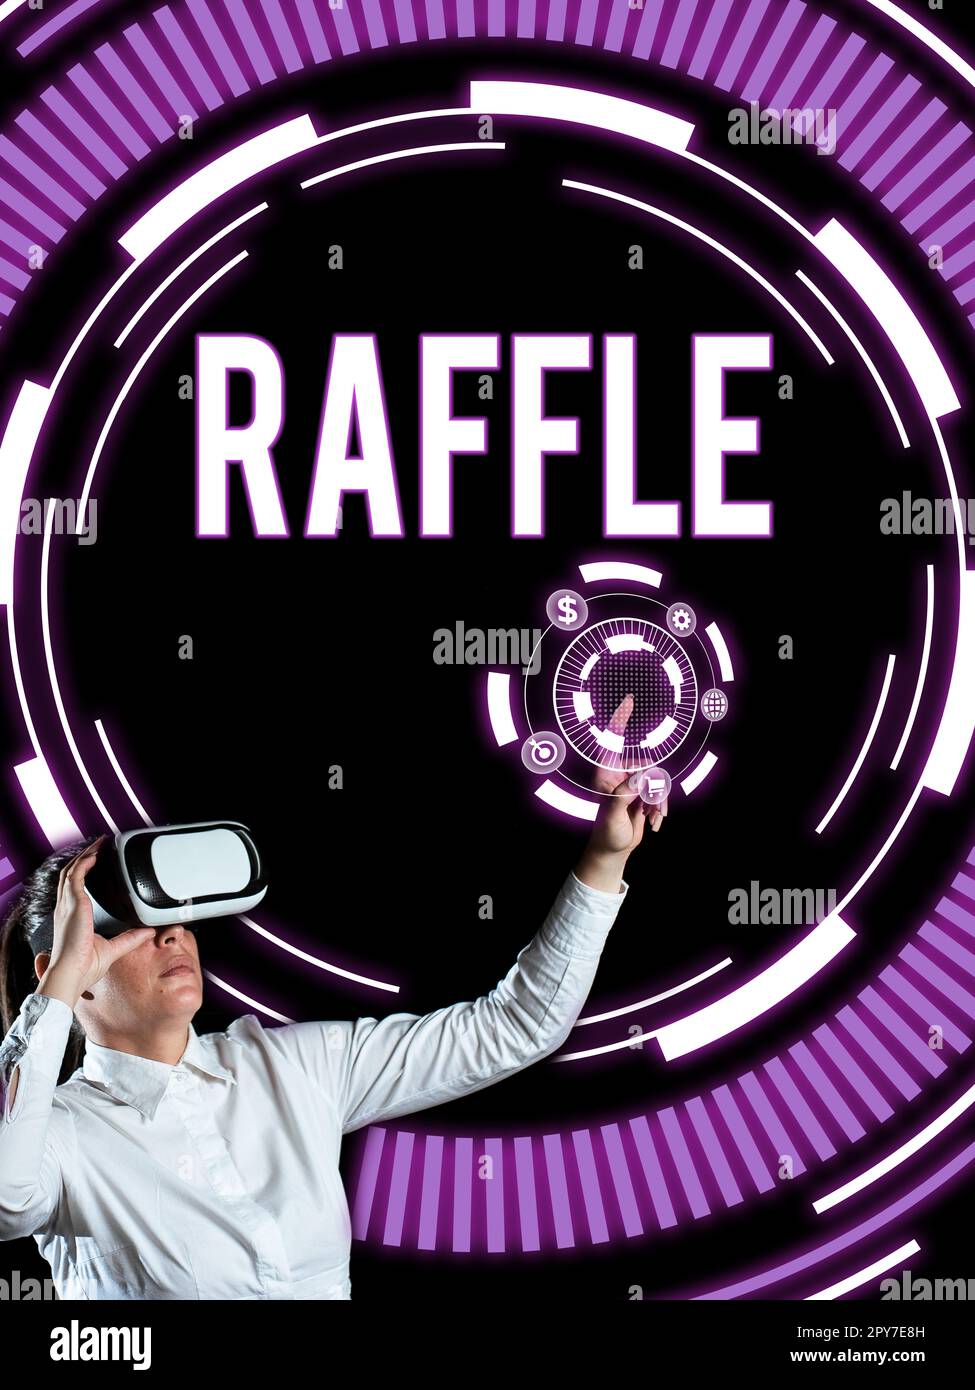 Inspiration showing sign Raffle. Business showcase means of raising money by selling numbered tickets offer as prize Stock Photo